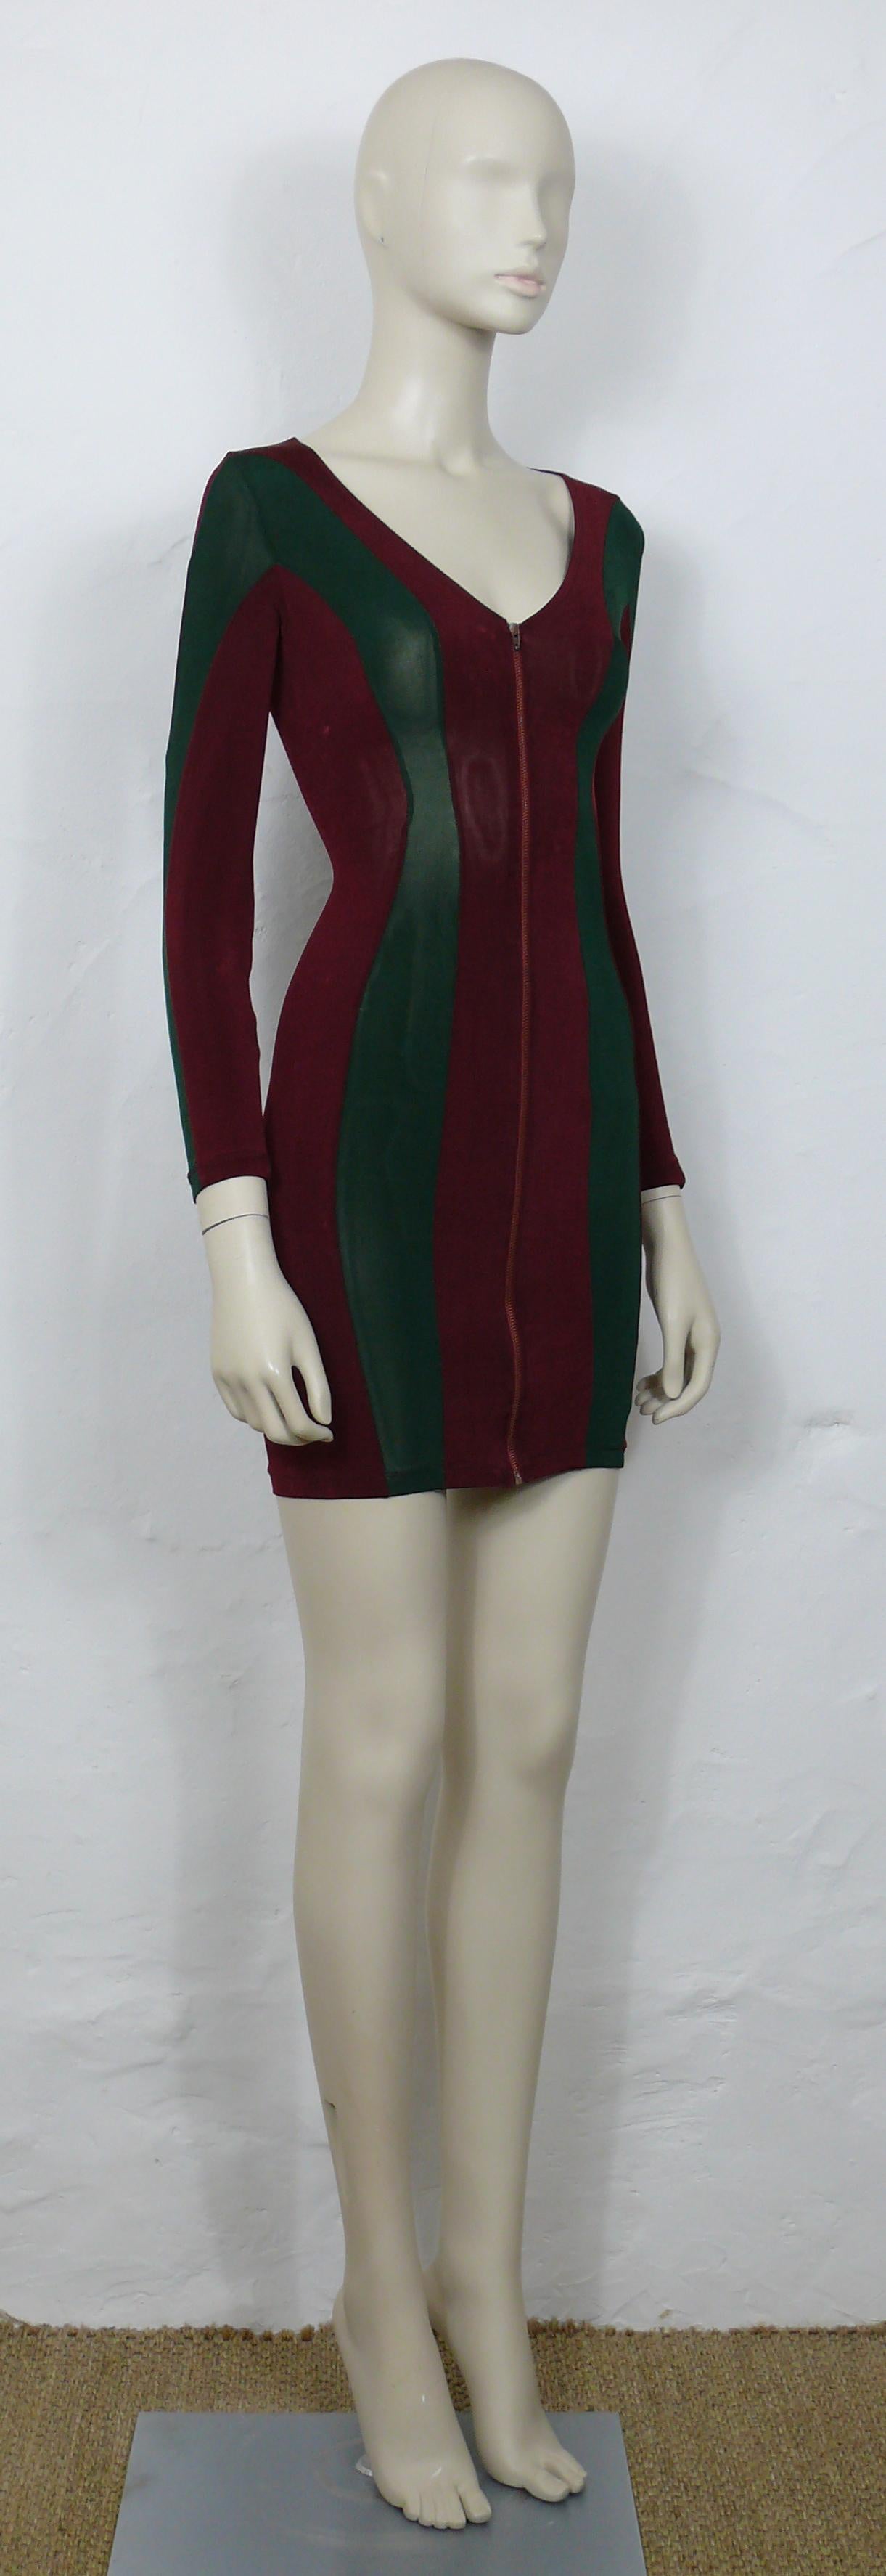 JEAN PAUL GAULTIER  JUNIOR vintage green/burgundy red color block bodycon dress.

Stretchy material.
Front down zippered closure (copper toned hardware).
Long sleeves.
No lining.

Missing brand label.
JUNIOR GAULTIER patch on the back.

Missing size